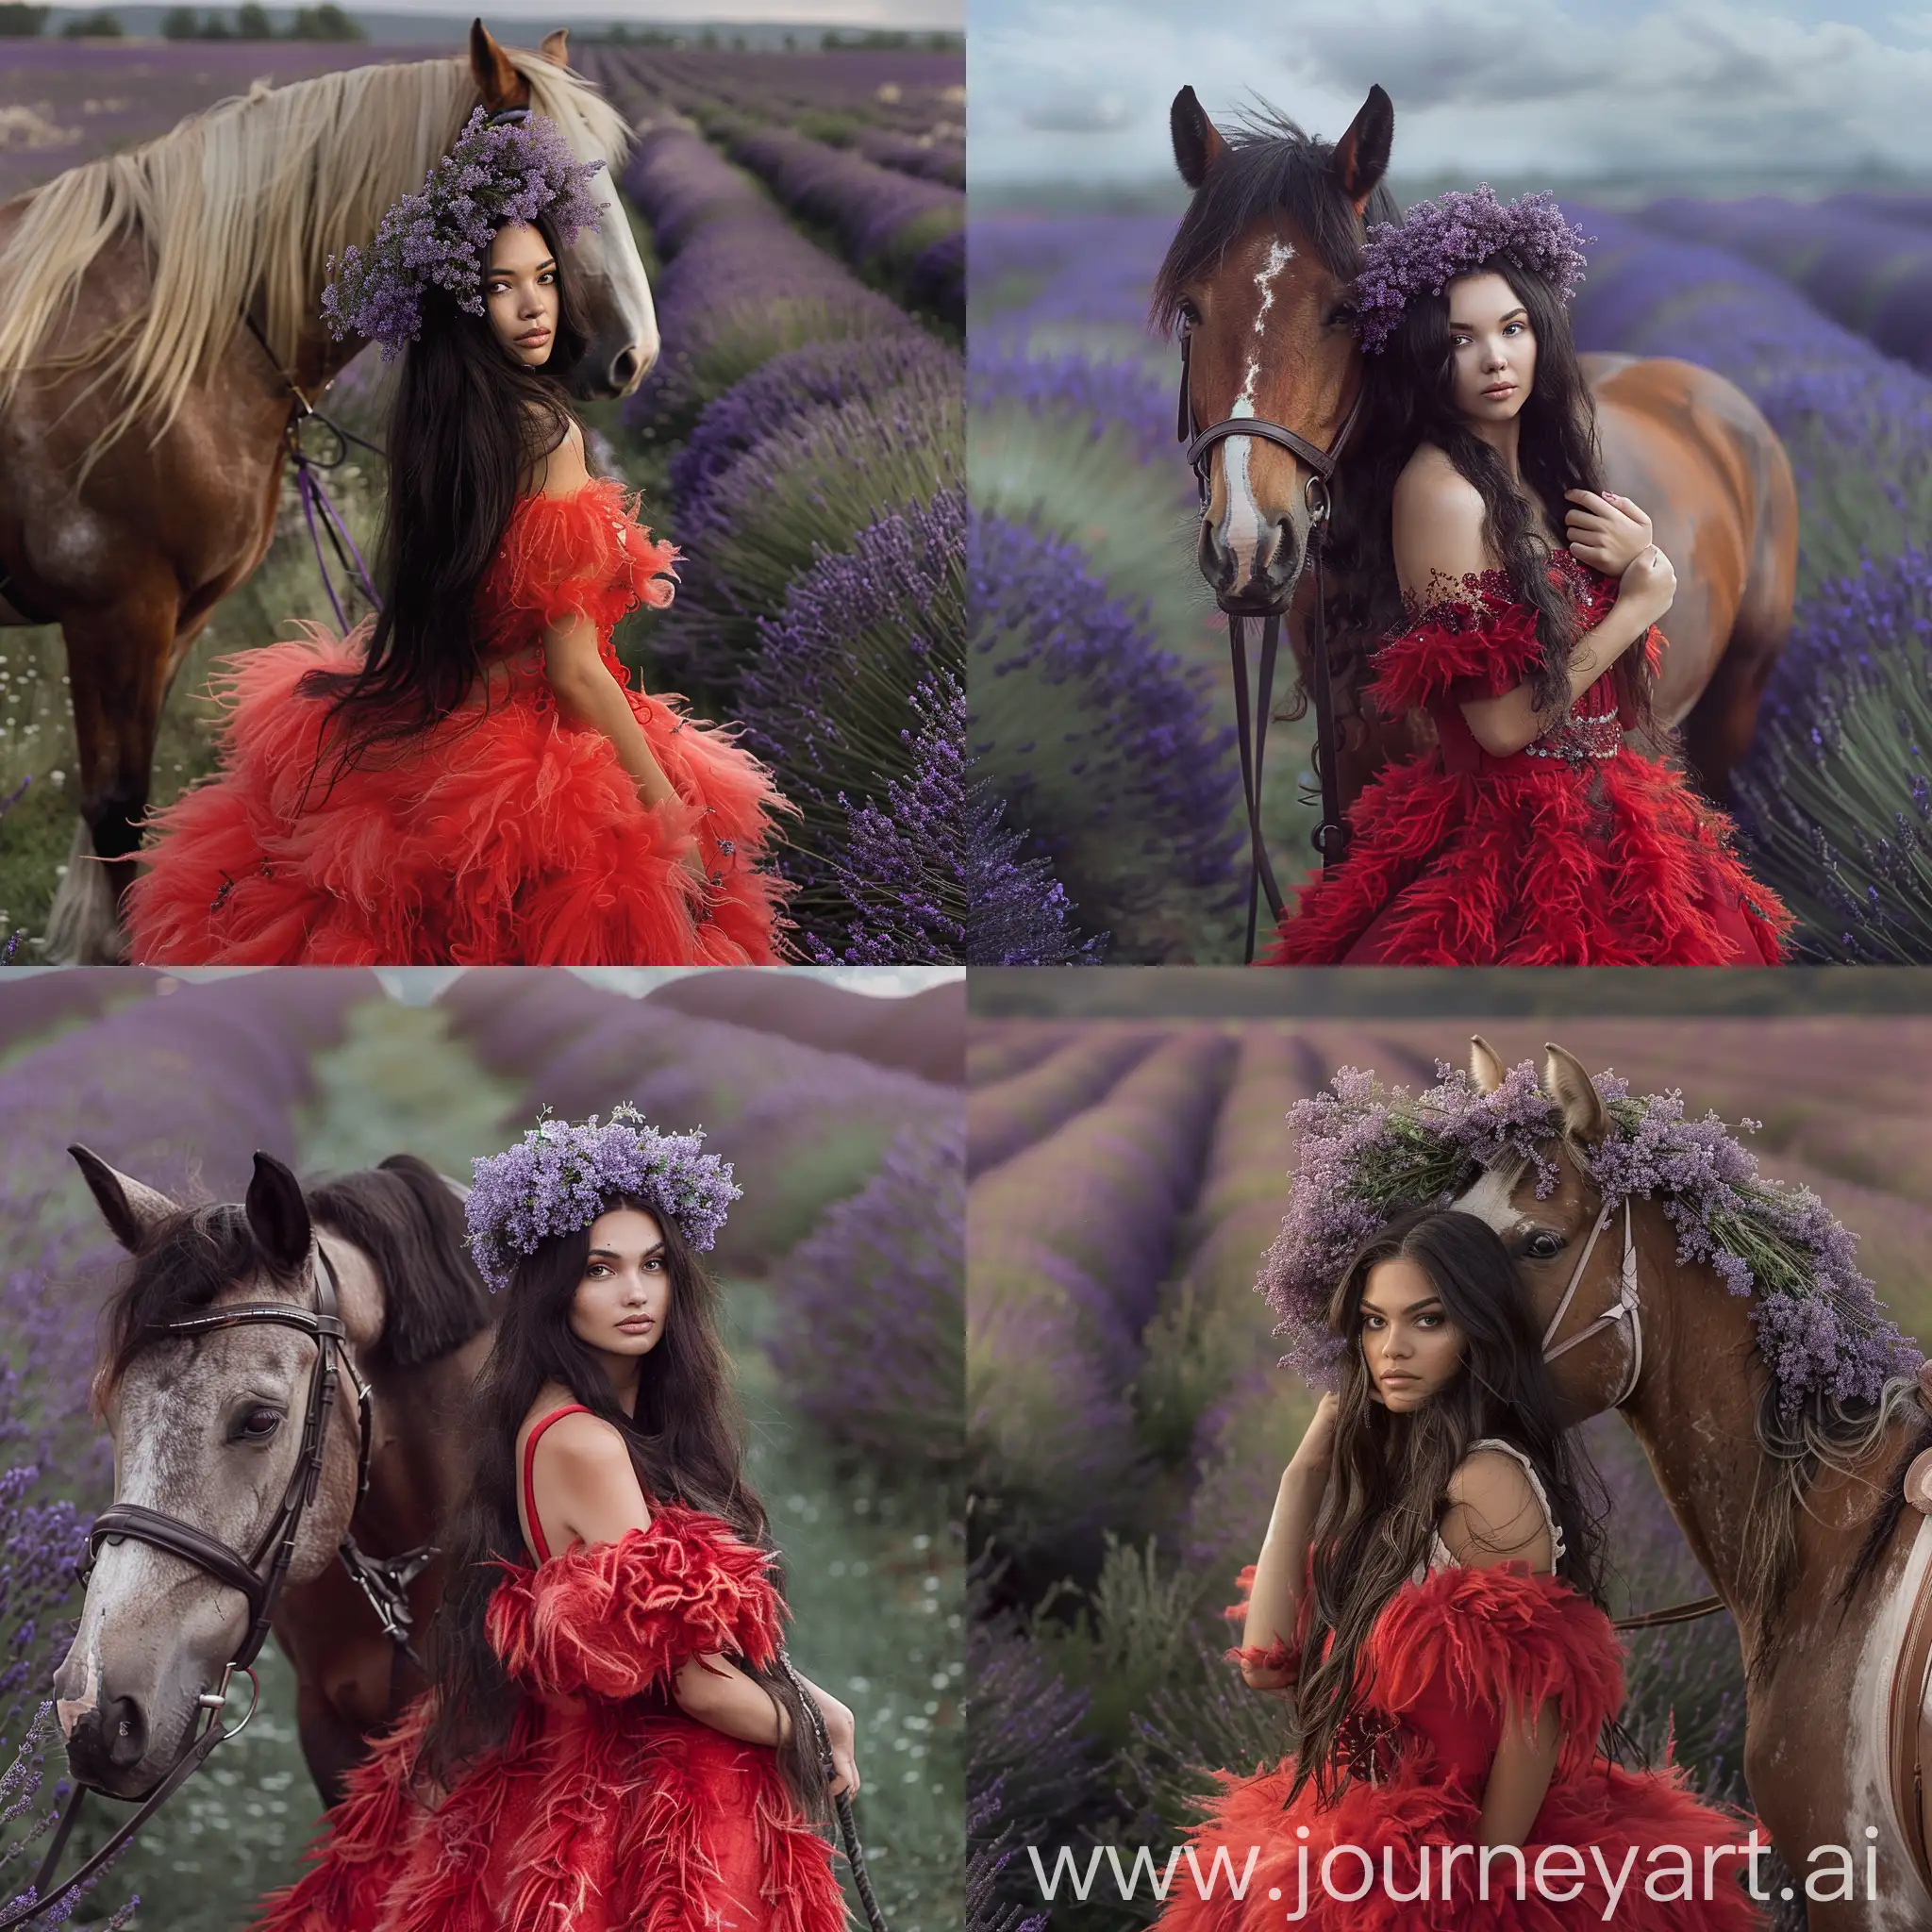 a woman with long dark hair, in a red fluffy dress, with a wreath of lilac on her head, stands next to a horse in a lavender field